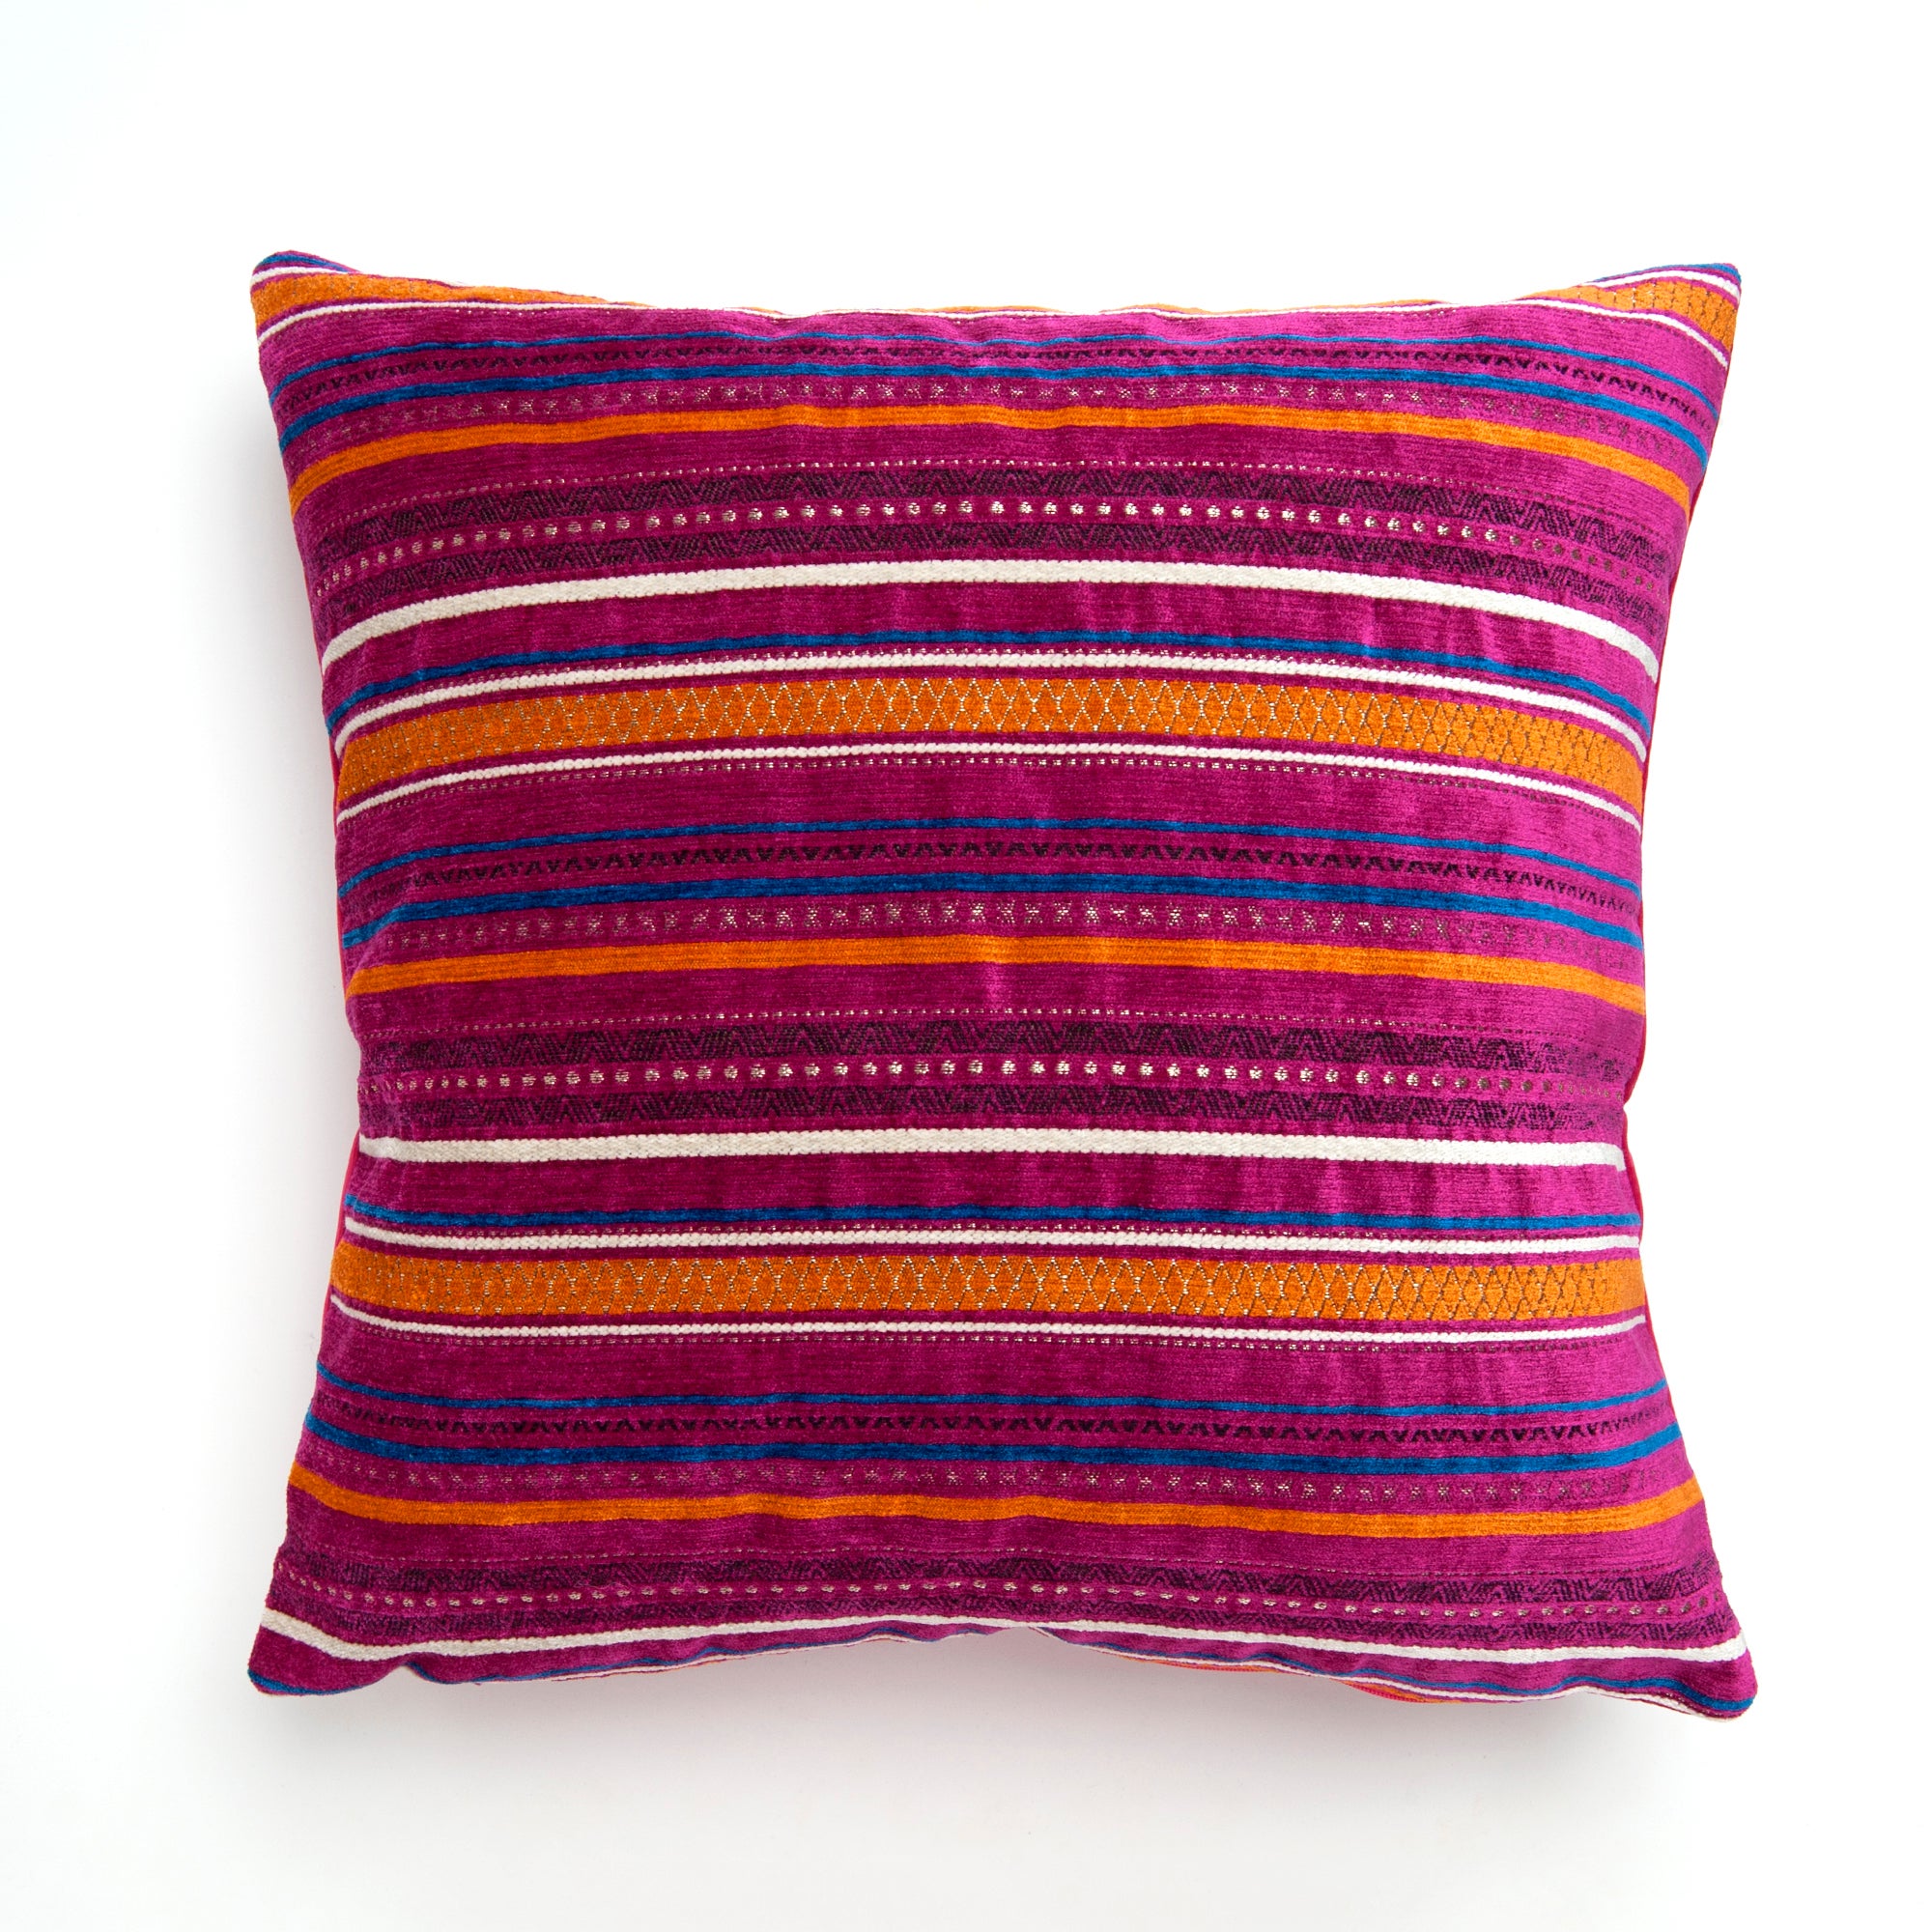 Image of Acton Stripe Fuschia Cushion Cover Pink, Blue and Yellow